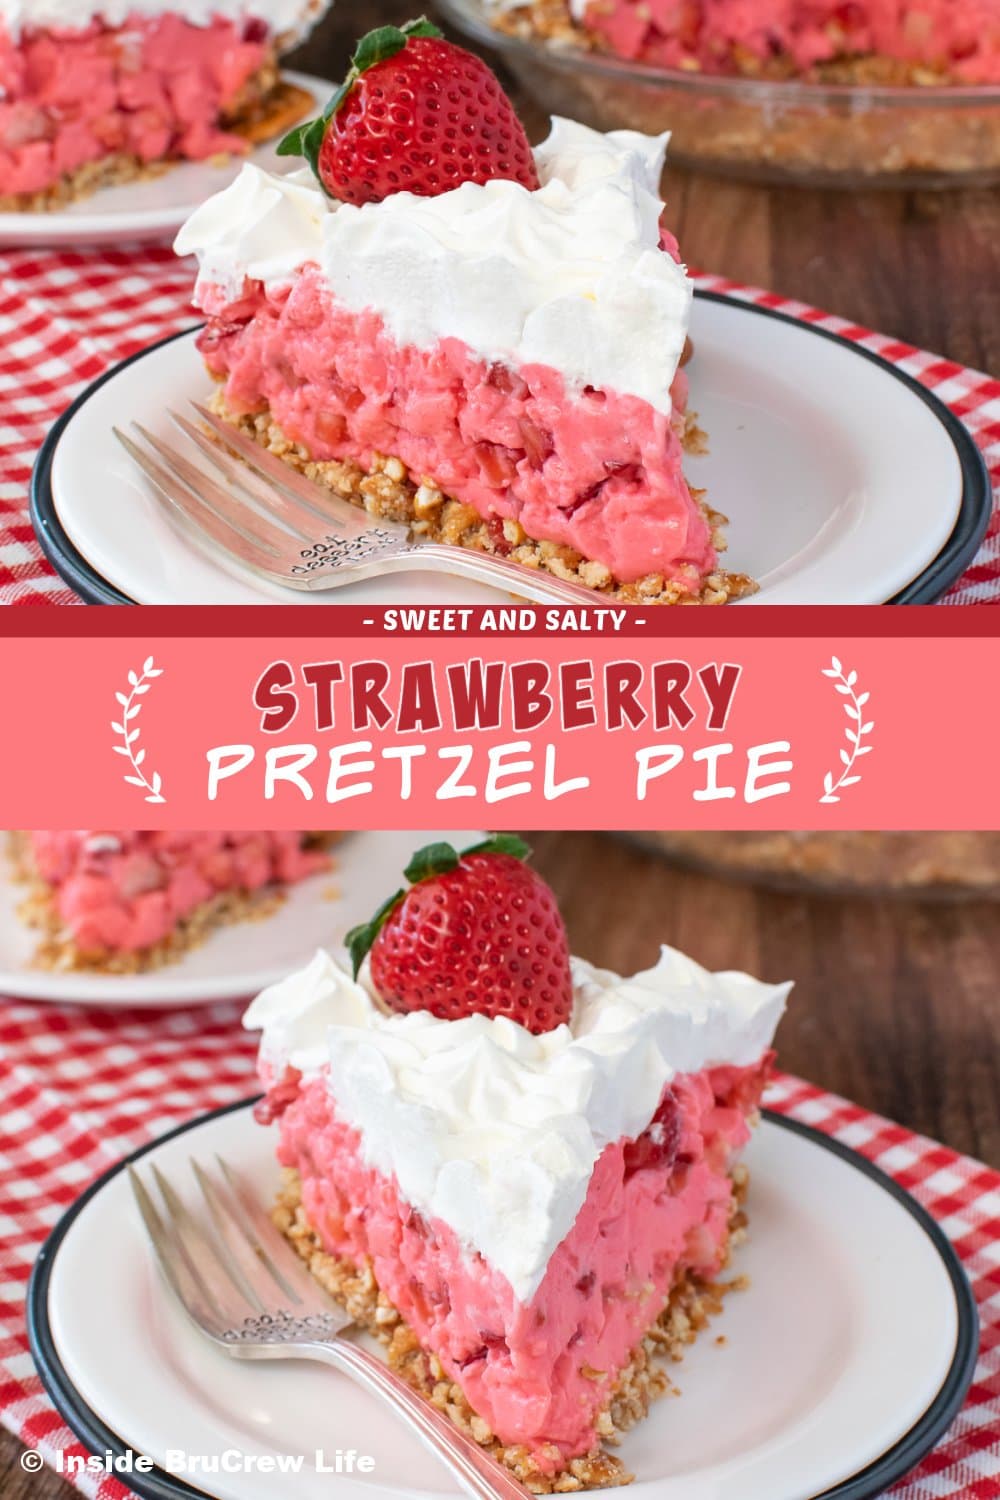 Two pictures of strawberry pretzel pie collaged together with a pink text box.